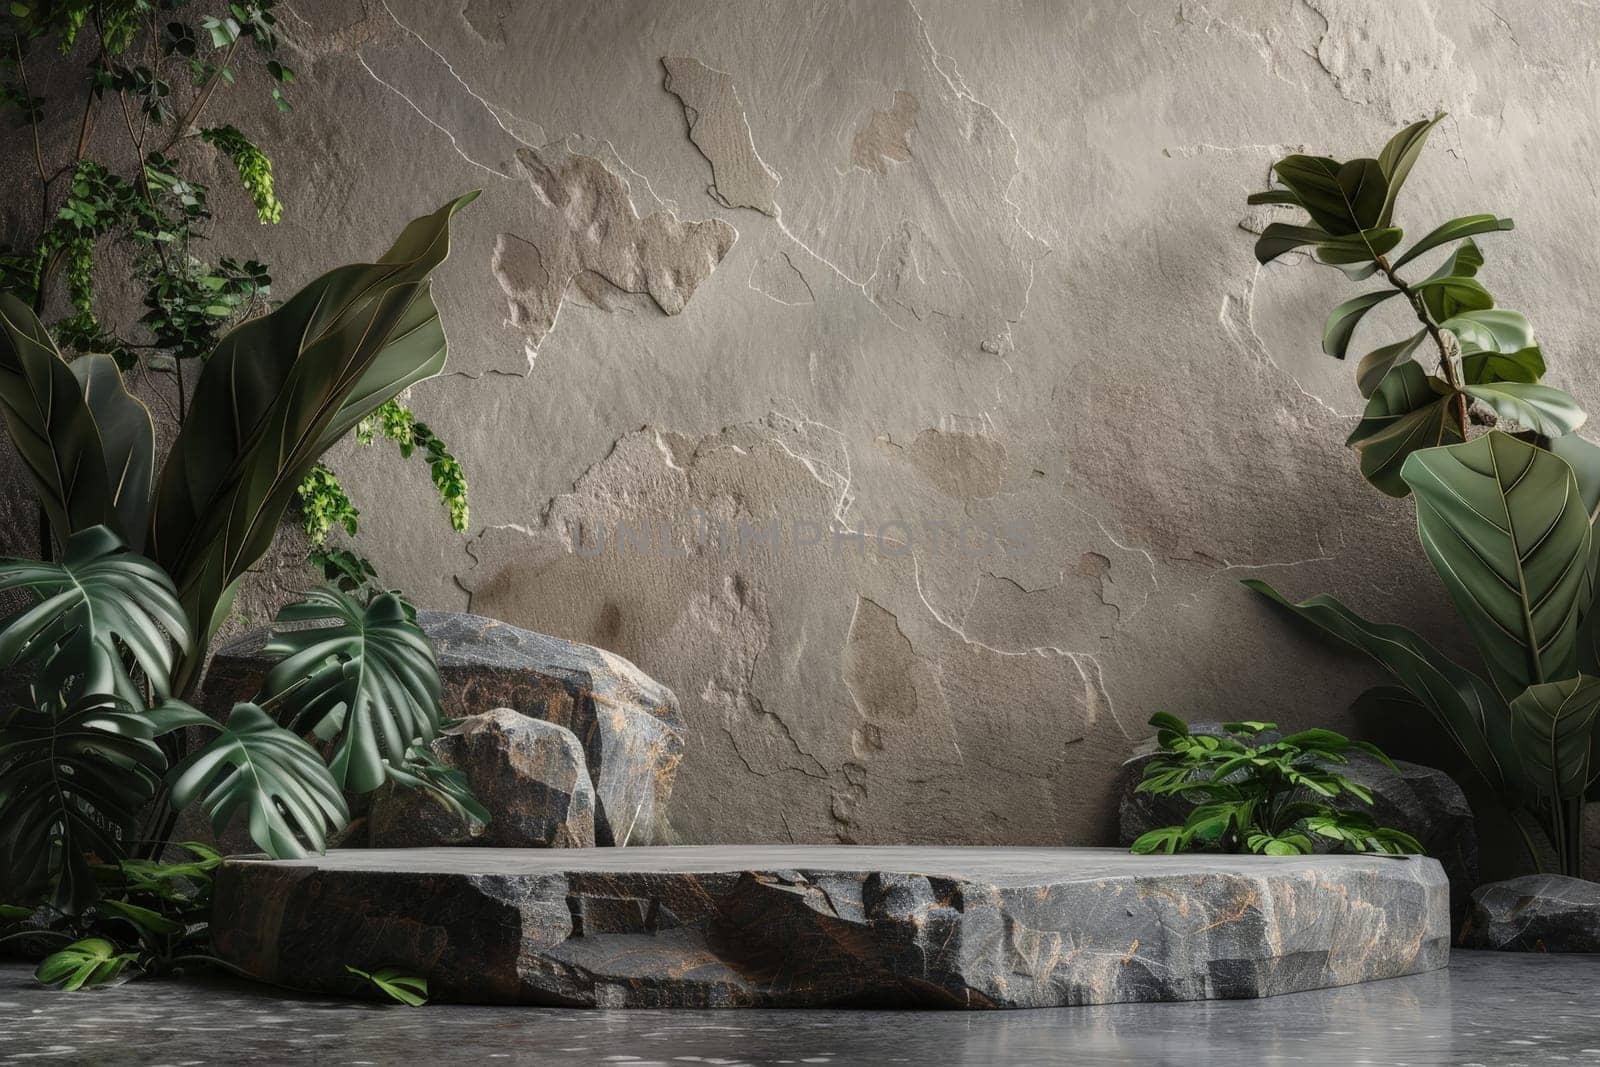 A stone pedestal with a green background and plants. stone podium for mockup.aigenerative by matamnad